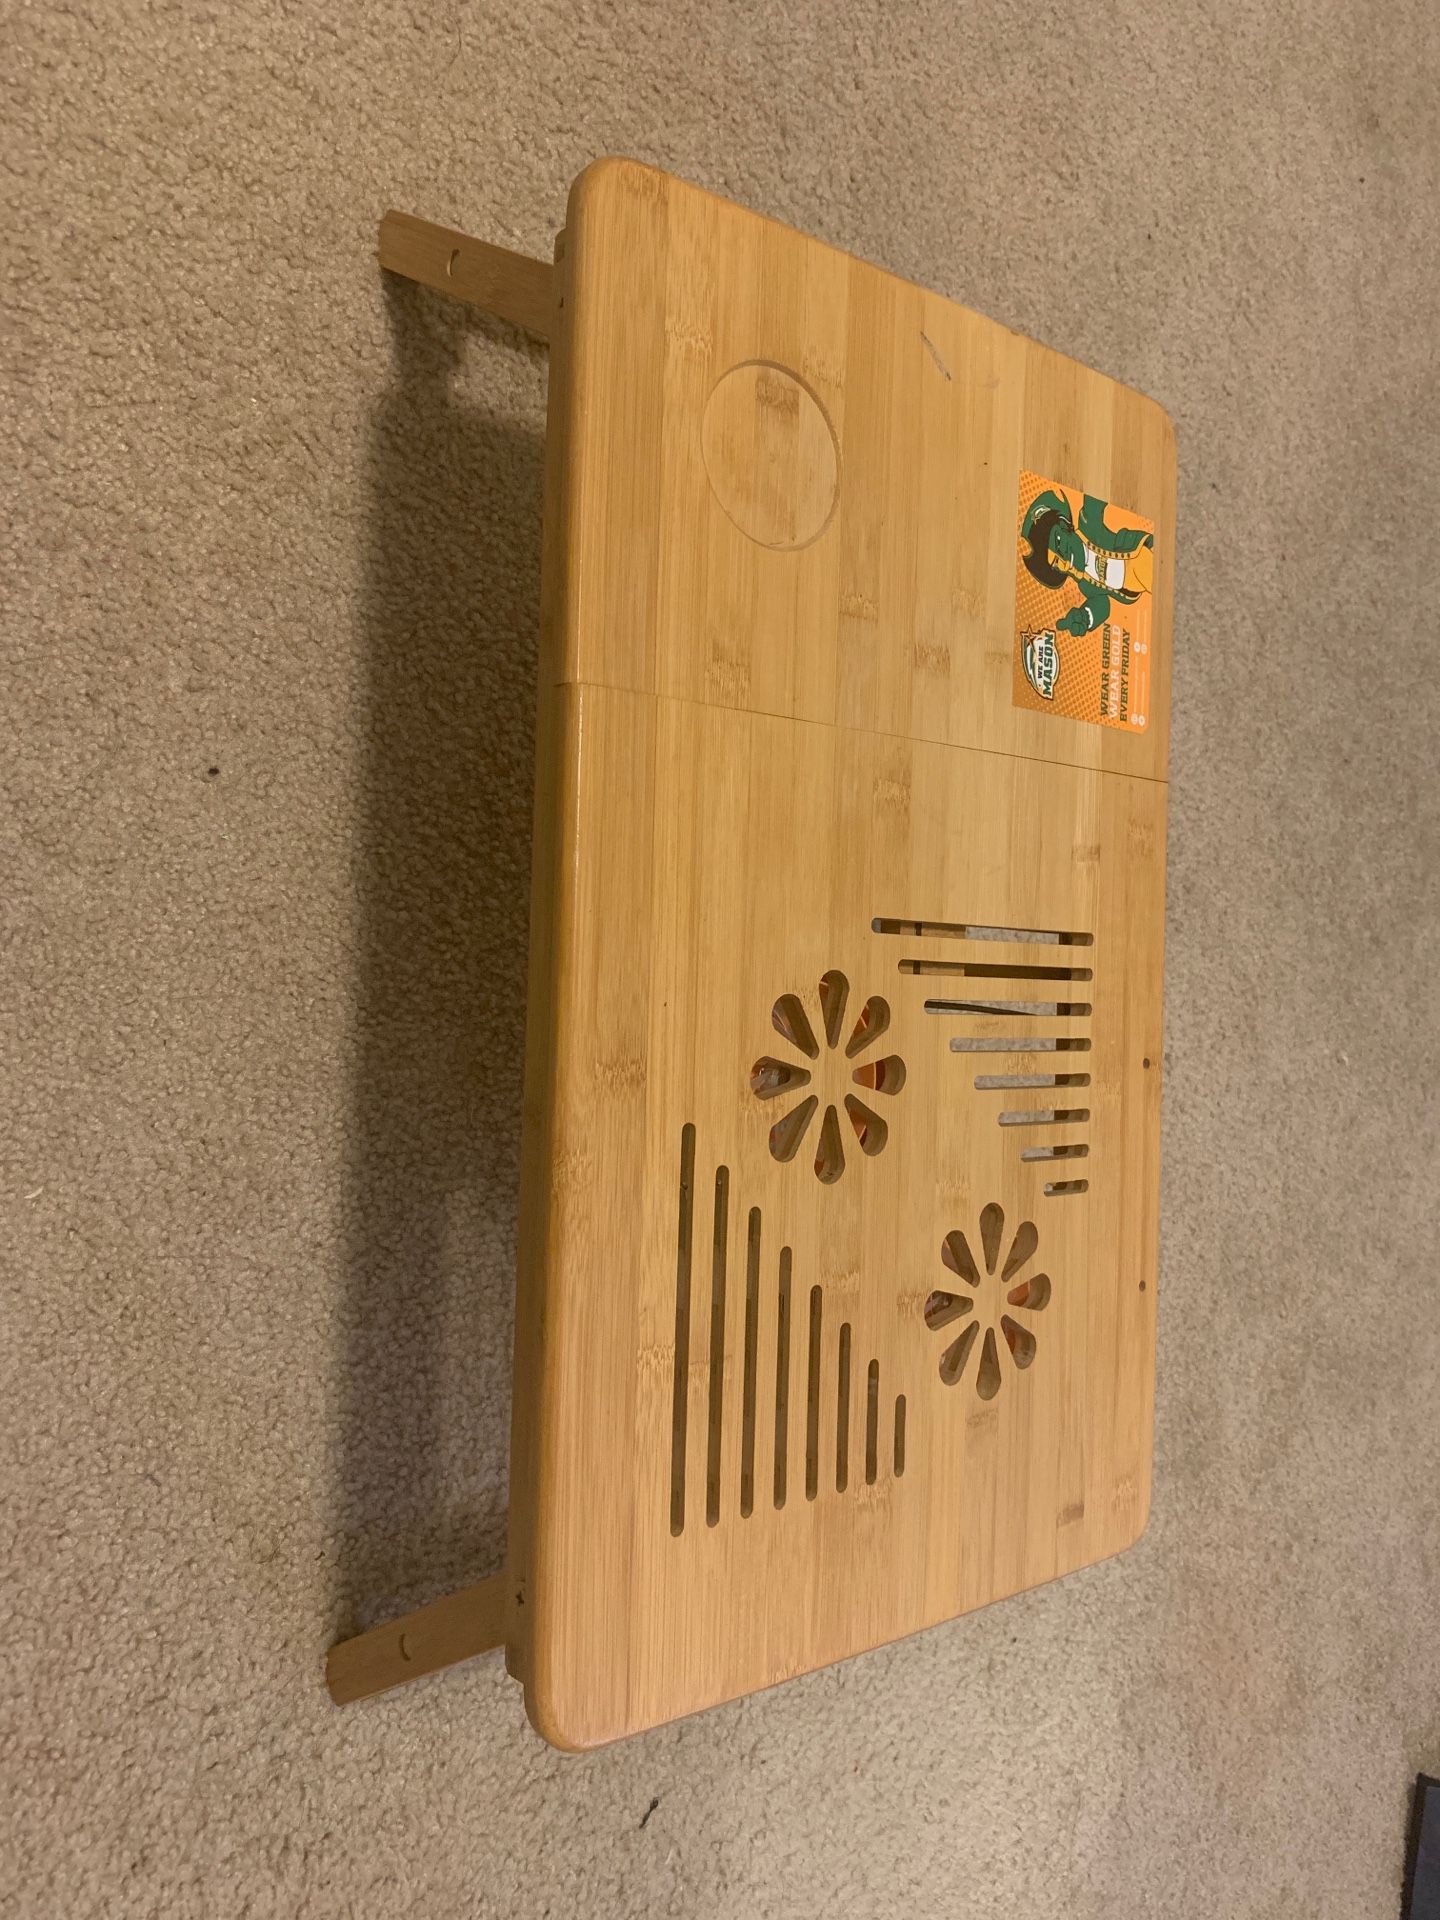 Strong bamboo study table/bed table with fan for laptop